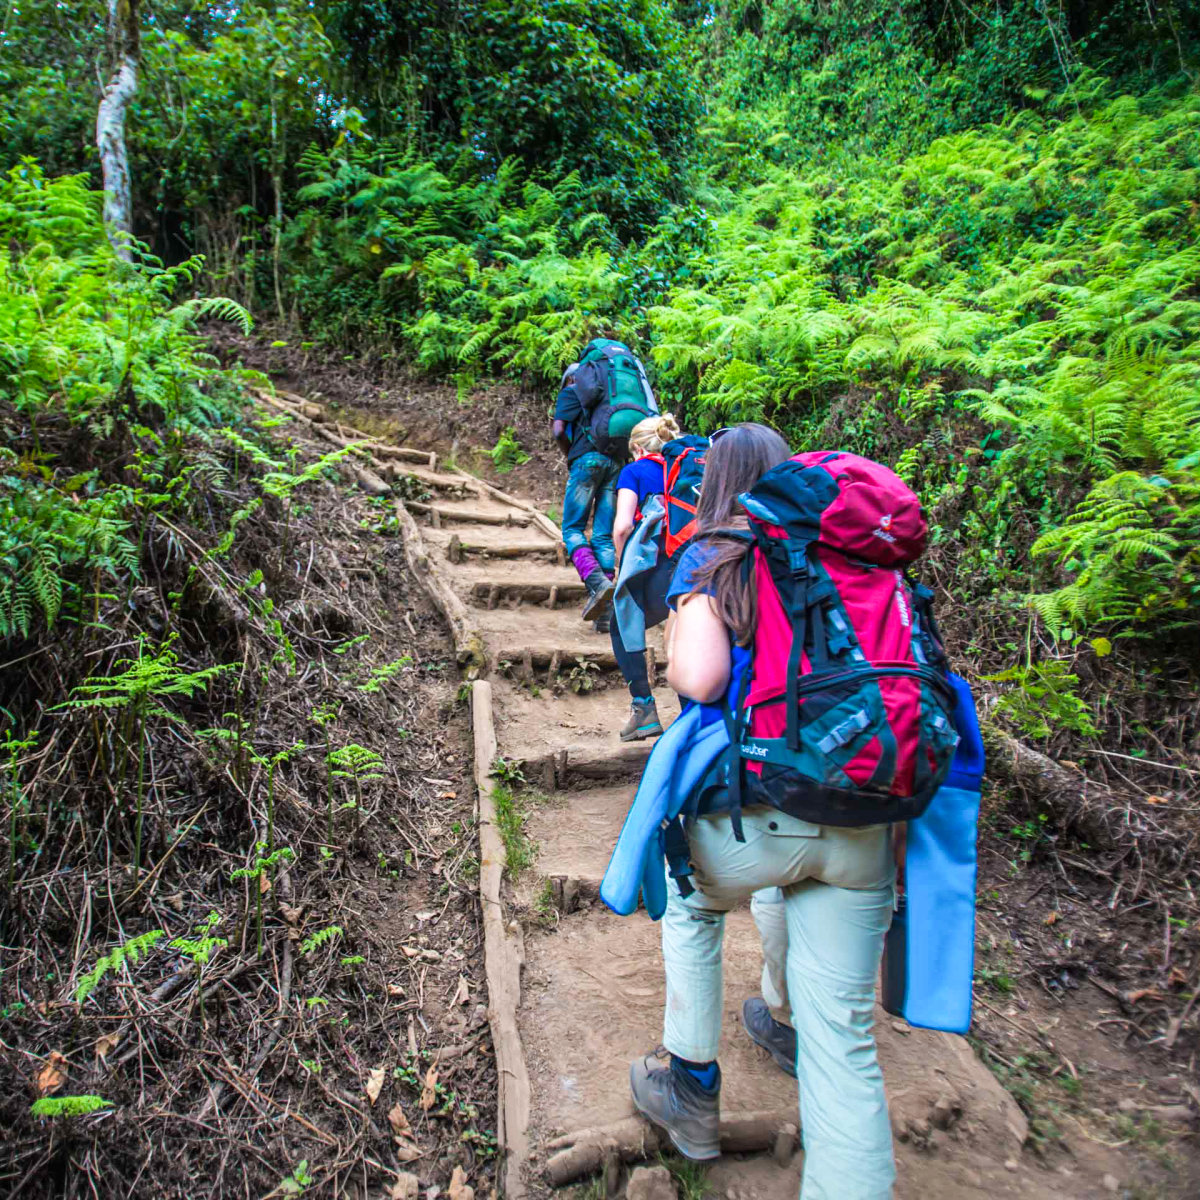 Trekkers climbing up steep path in the forest of Kilimanjaro